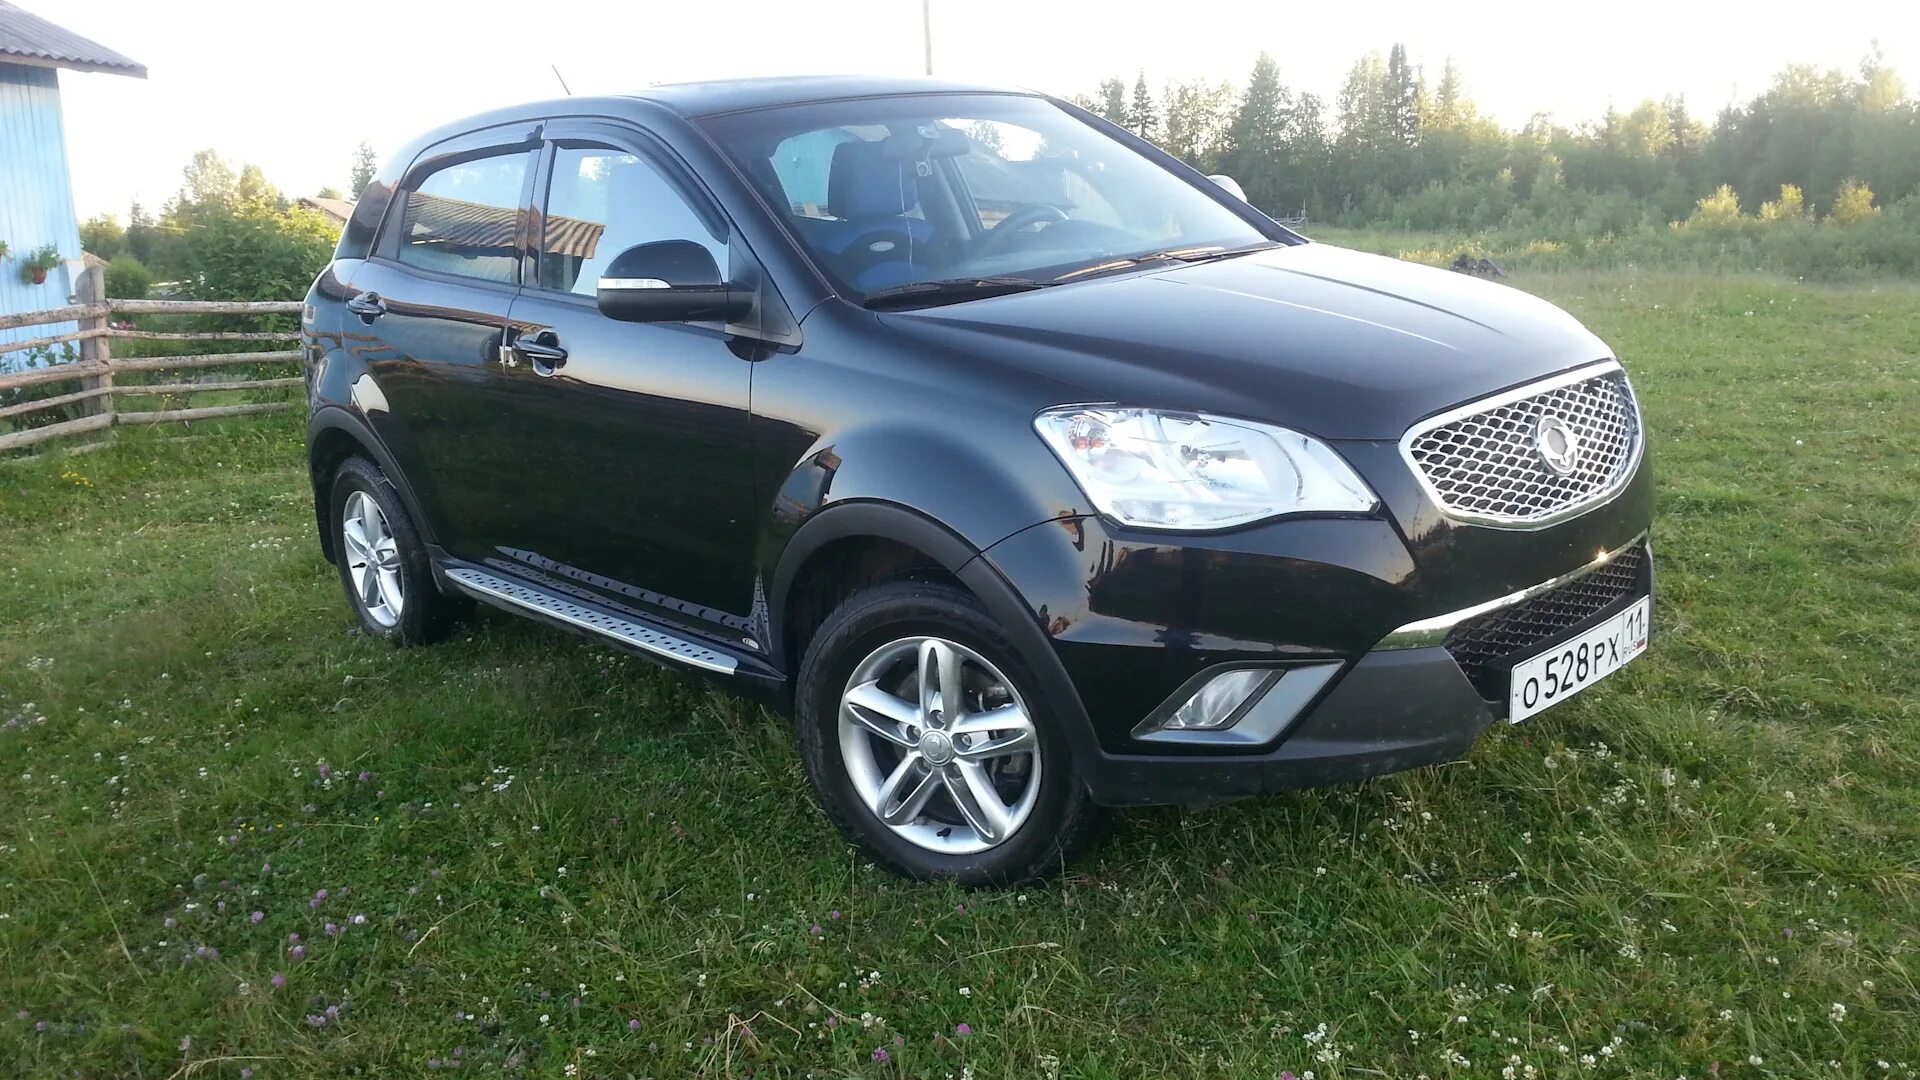 SSANGYONG Actyon (2g). Санг енг Актион 2. Саньенг Актион 2013 2.0 дизель. SSANGYONG Actyon Elegance. Актион культура